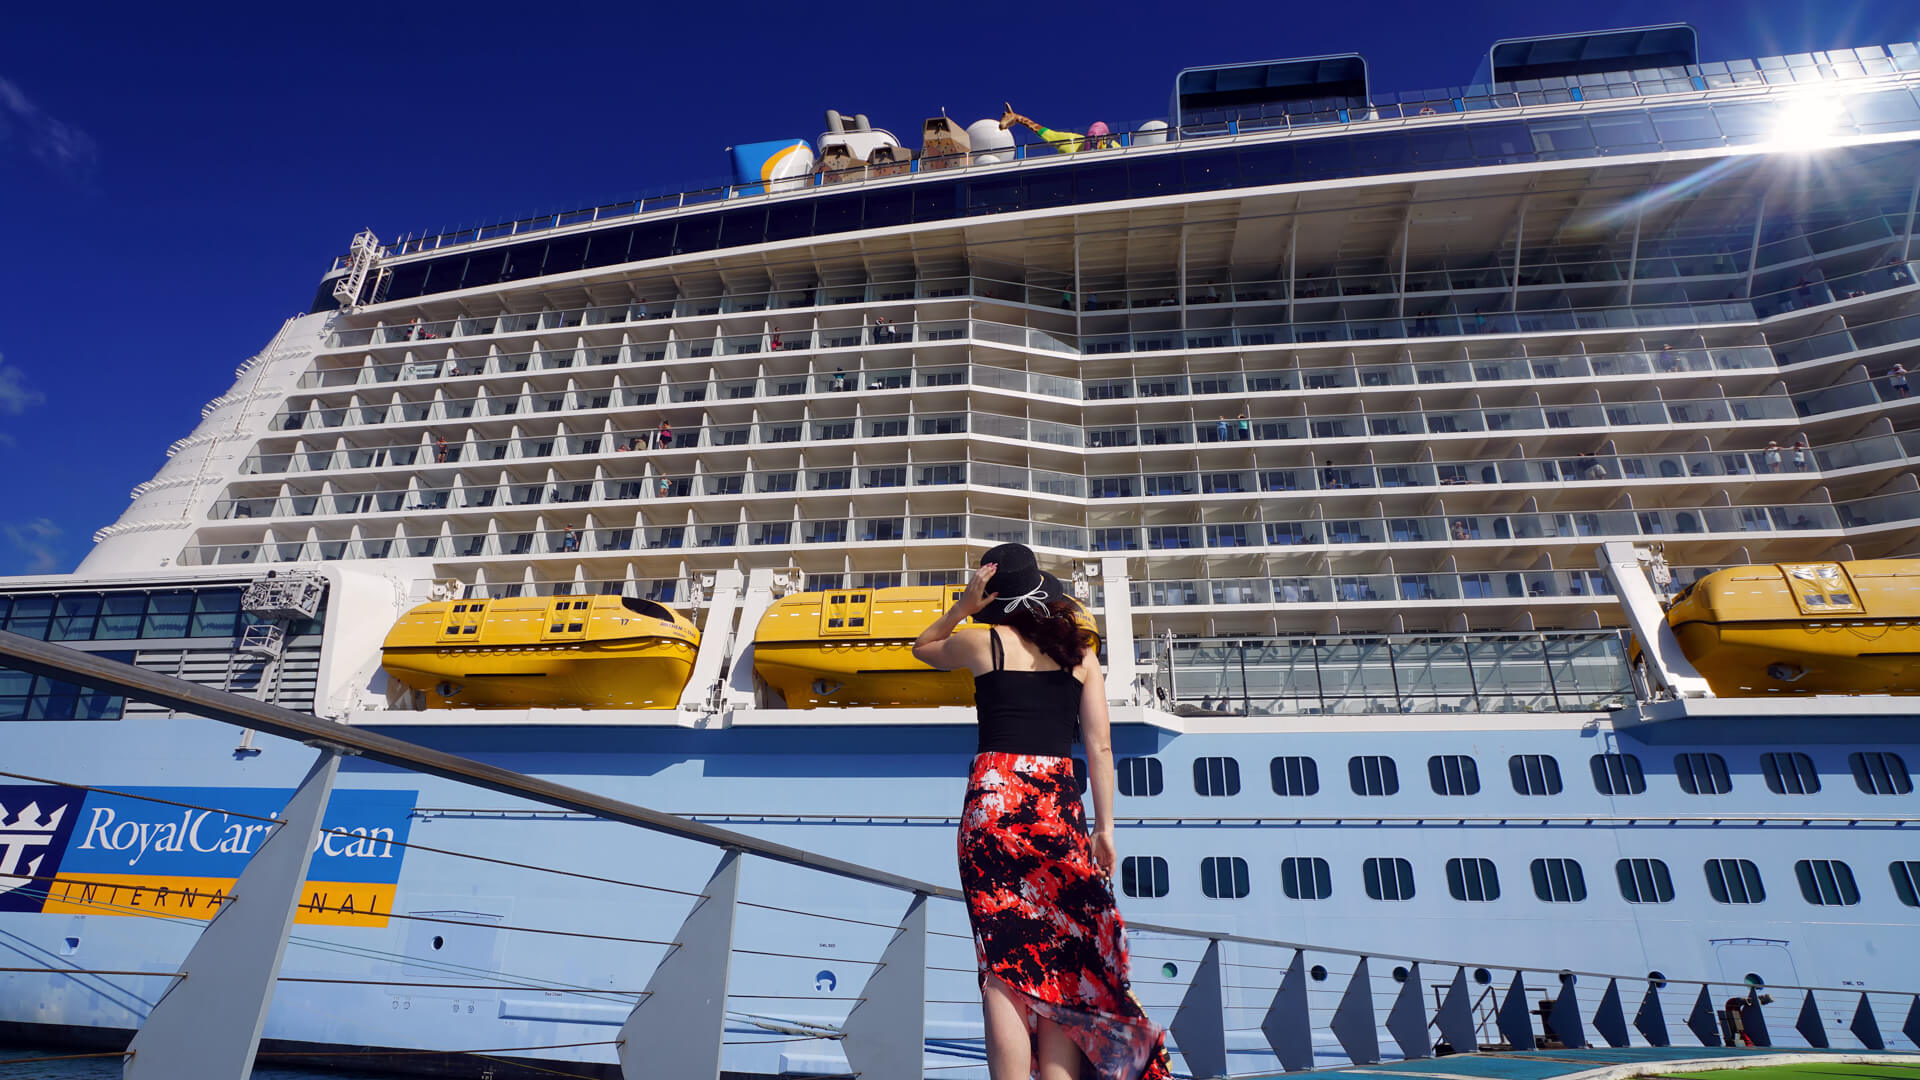 <p>If you travel solo, you might be paying more for your single cabin. That’s because cruise lines price cabins assuming double occupancy, Chiron said. So, look for cruises that offer cabins for singles and compare pricing. Make sure you don’t make these costly mistakes while traveling alone.</p>